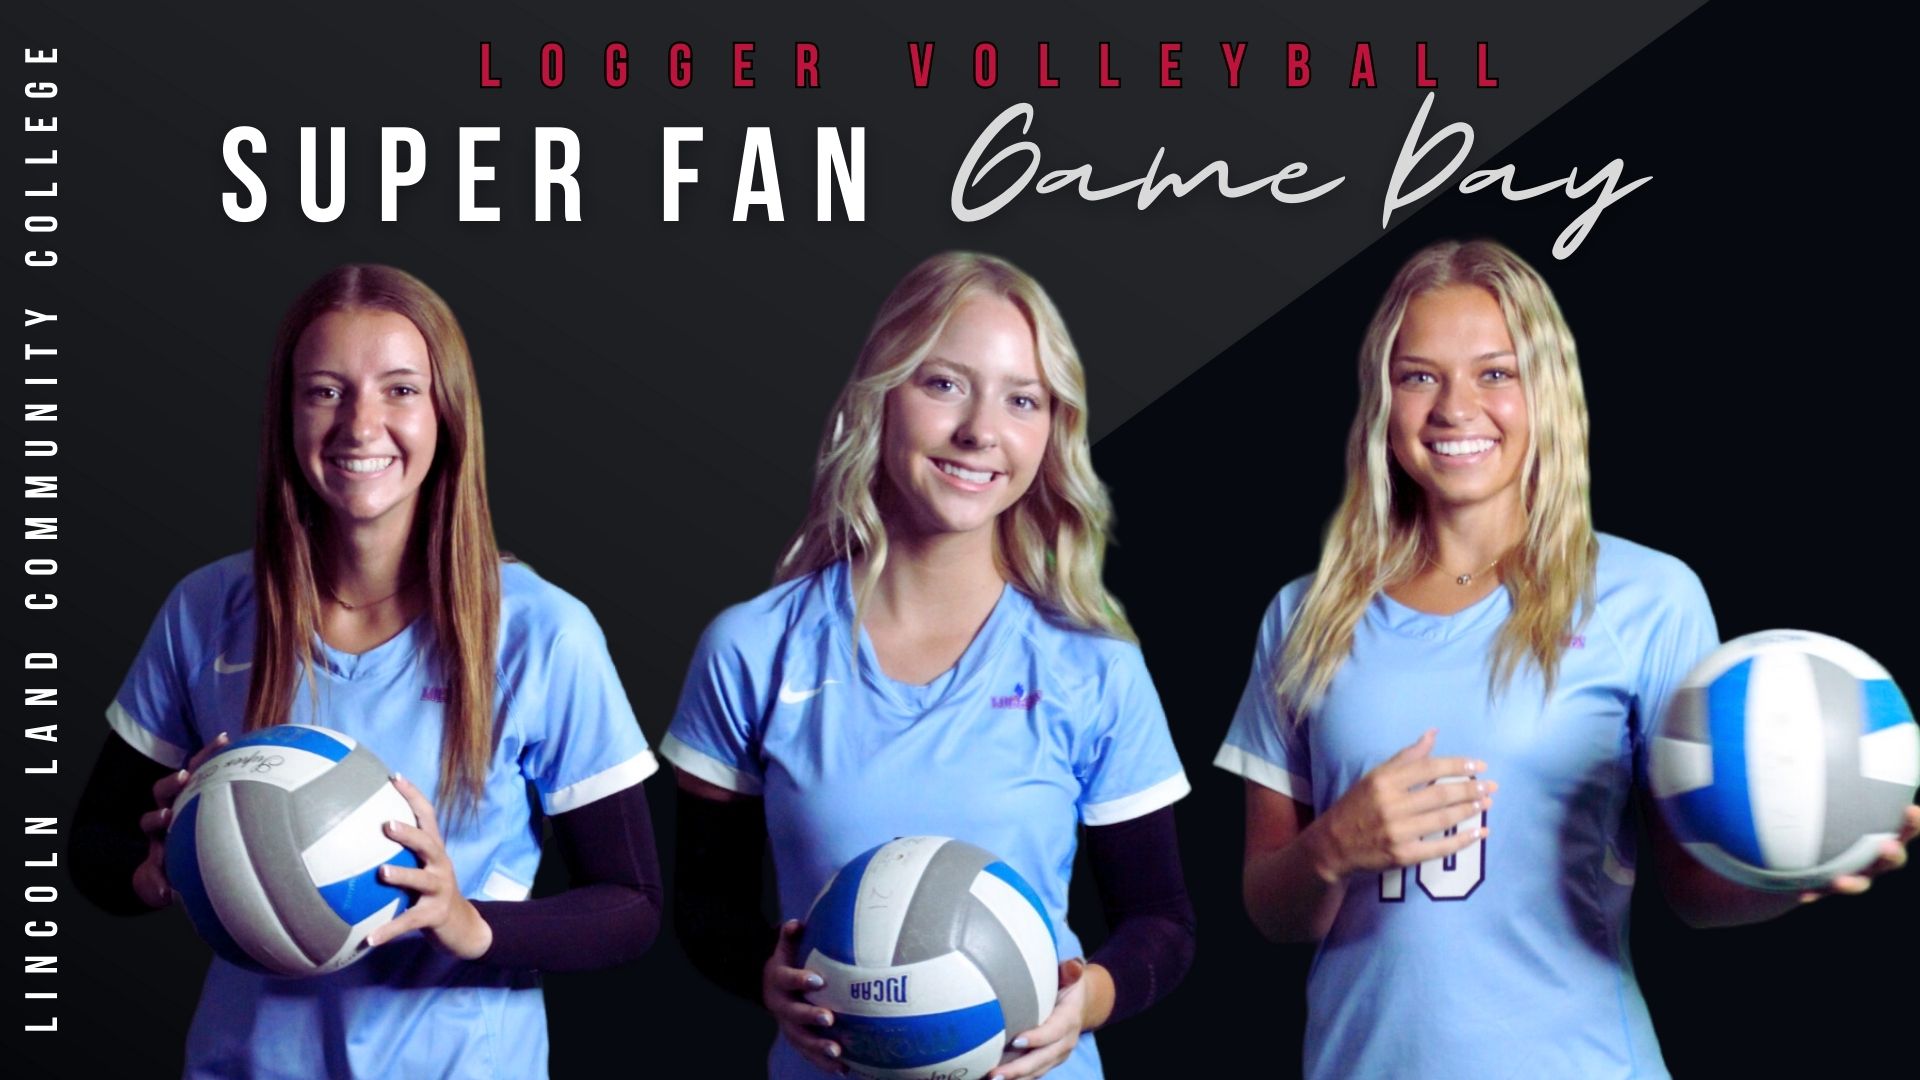 Lincoln Land Community College Super Fan Game Day. Photo of three volleyball players